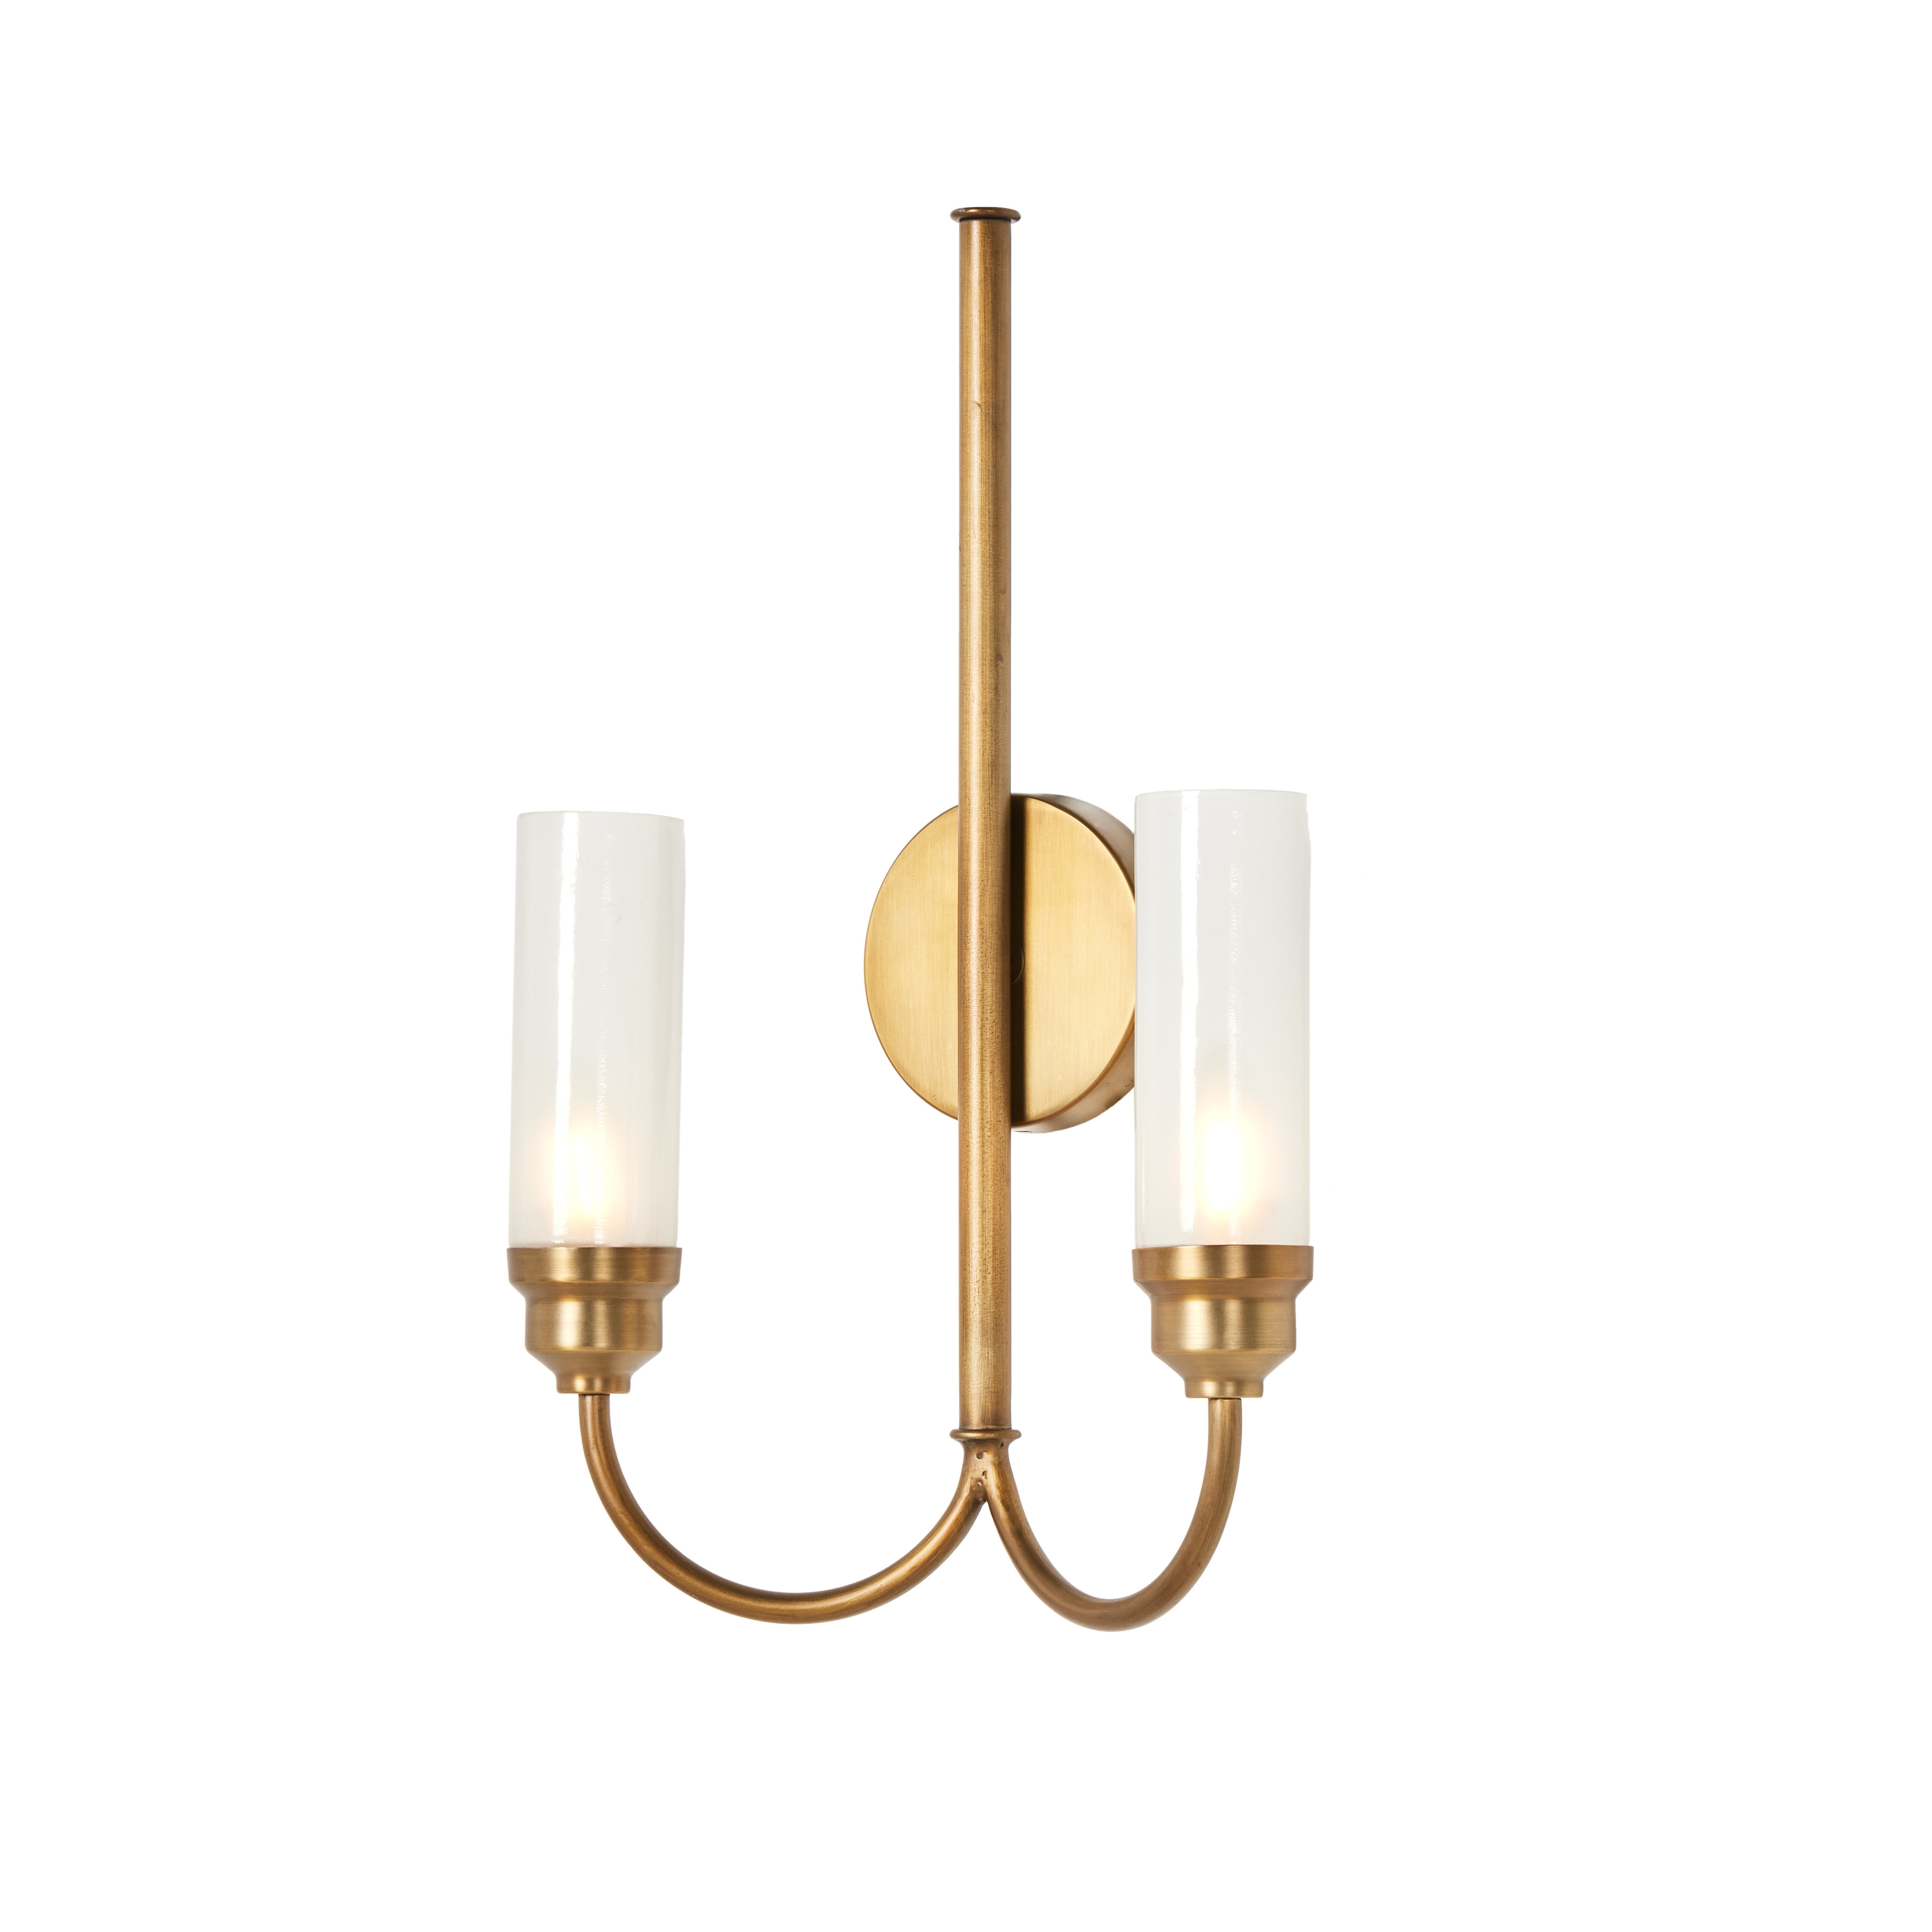 Darby Sconce-Antique Brass Iron - Image 3